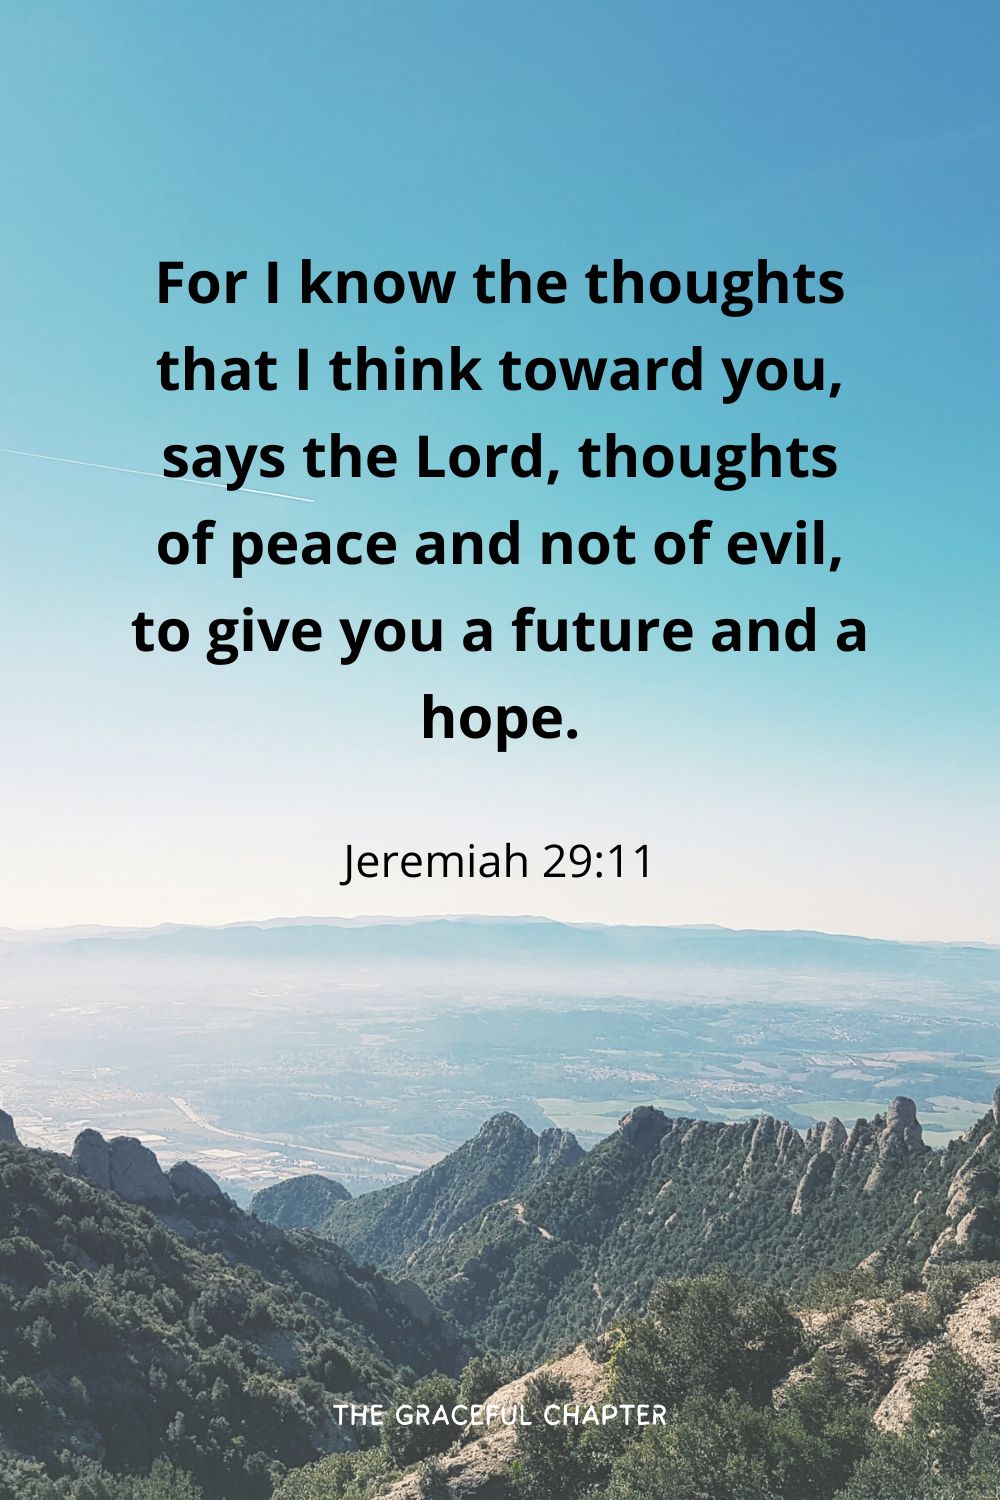 For I know the thoughts that I think toward you, says the Lord, thoughts of peace and not of evil, to give you a future and a hope.